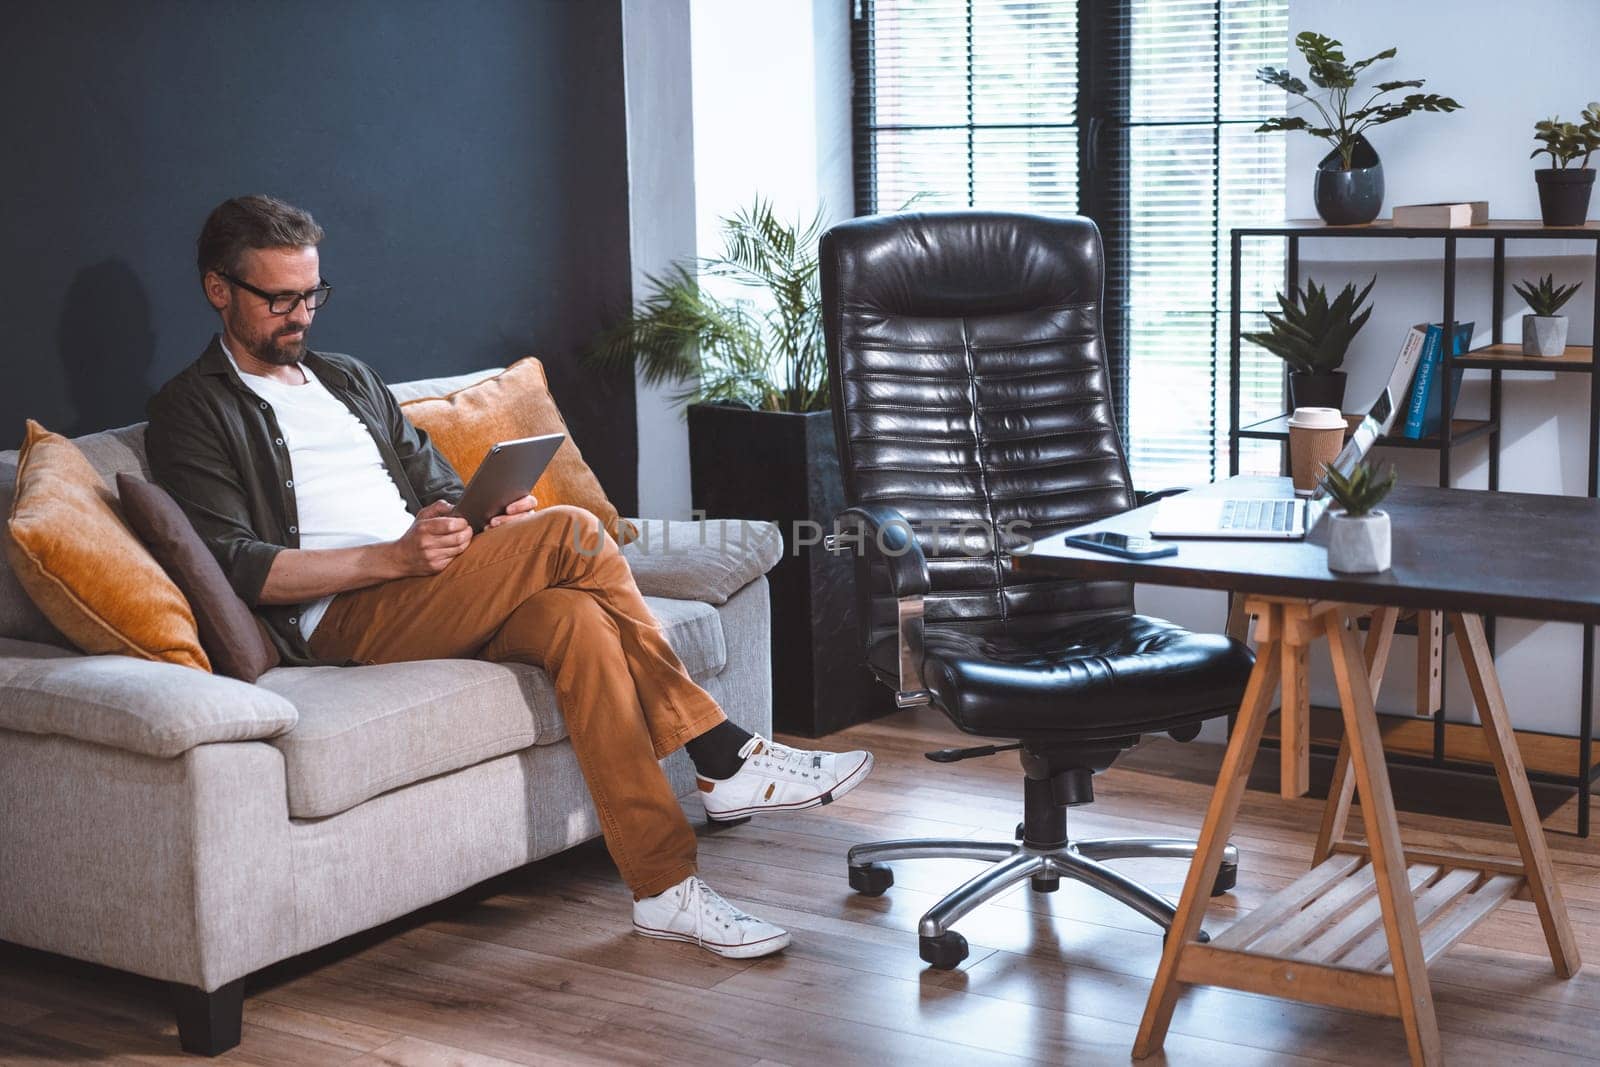 Freelancer sitting on sofa, looking relaxed as he uses tablet PC. Laptop on desk and empty chair can be seen nearby in room. Concept of relaxation after work, and ease and comfort of working from home by LipikStockMedia